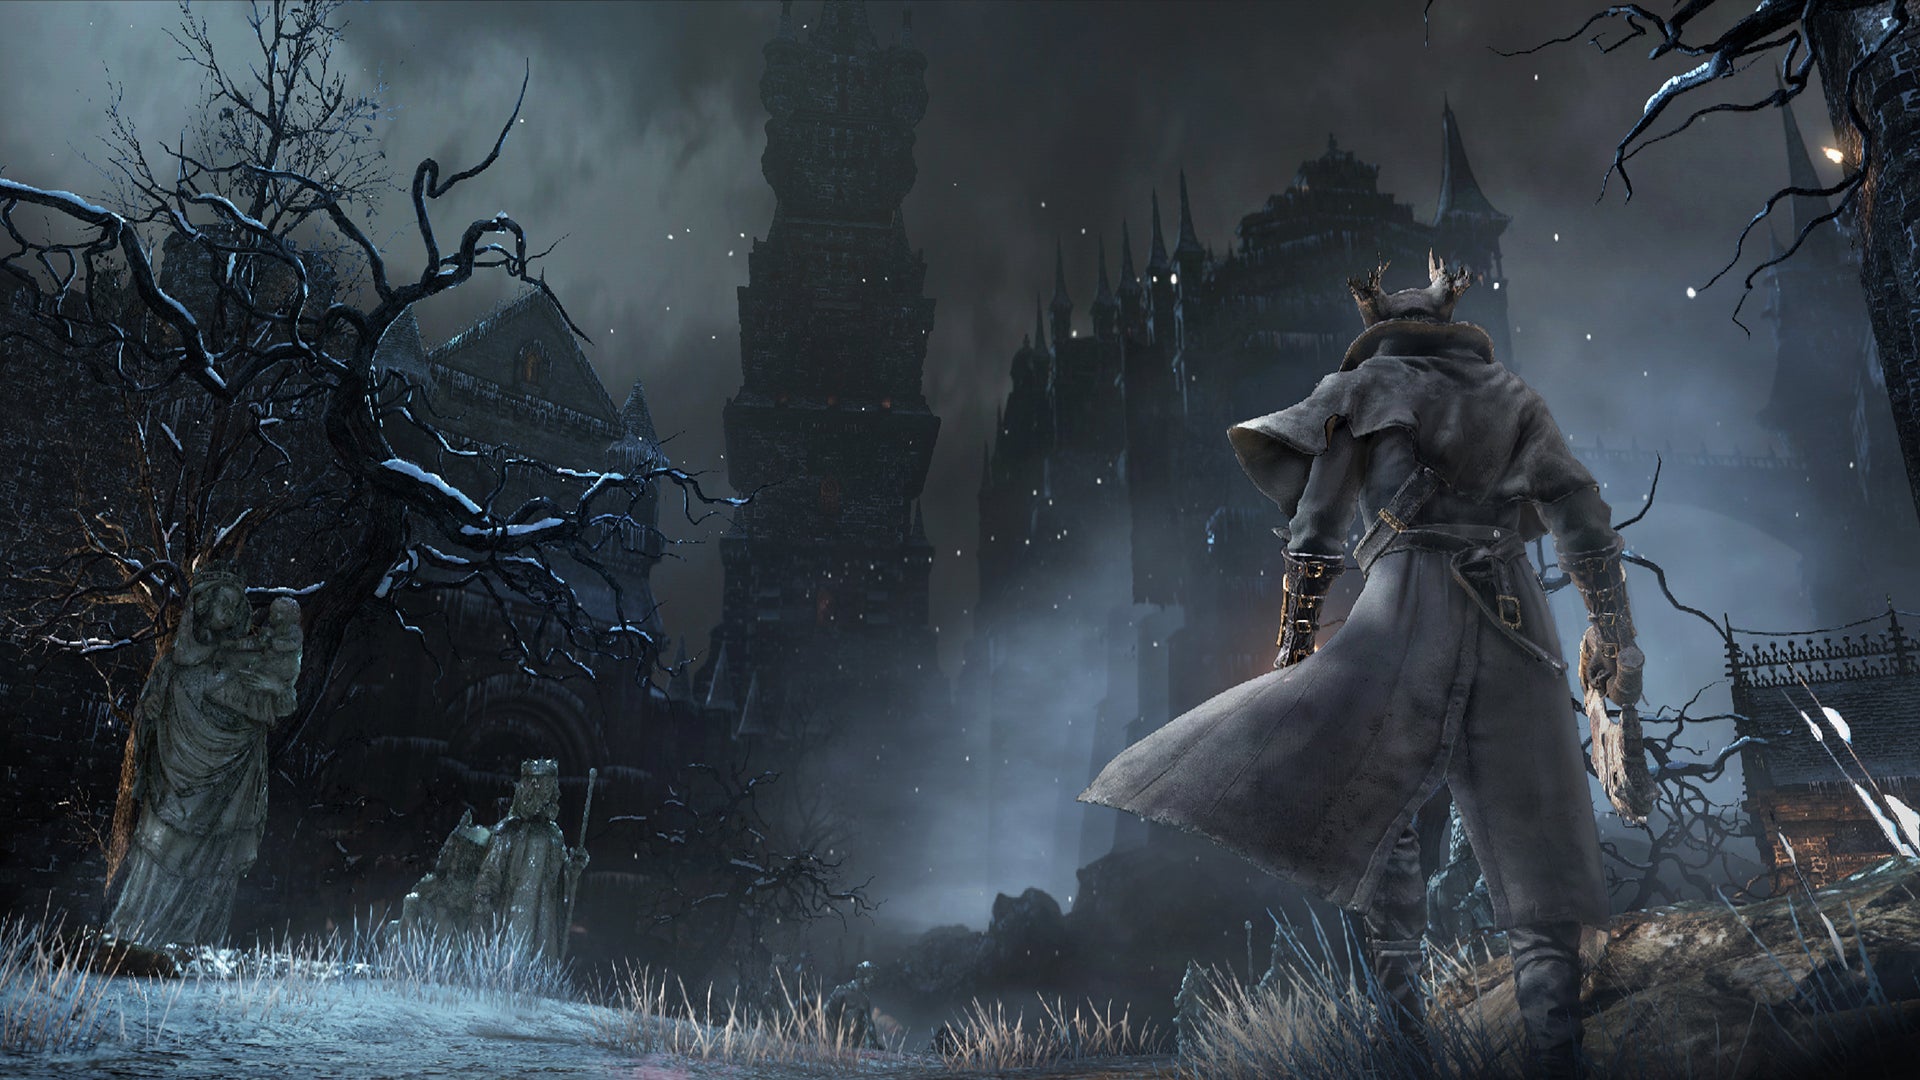 Bloodborne' Is Getting A Halloween-Themed Event Thanks To Fans - GAMINGbible